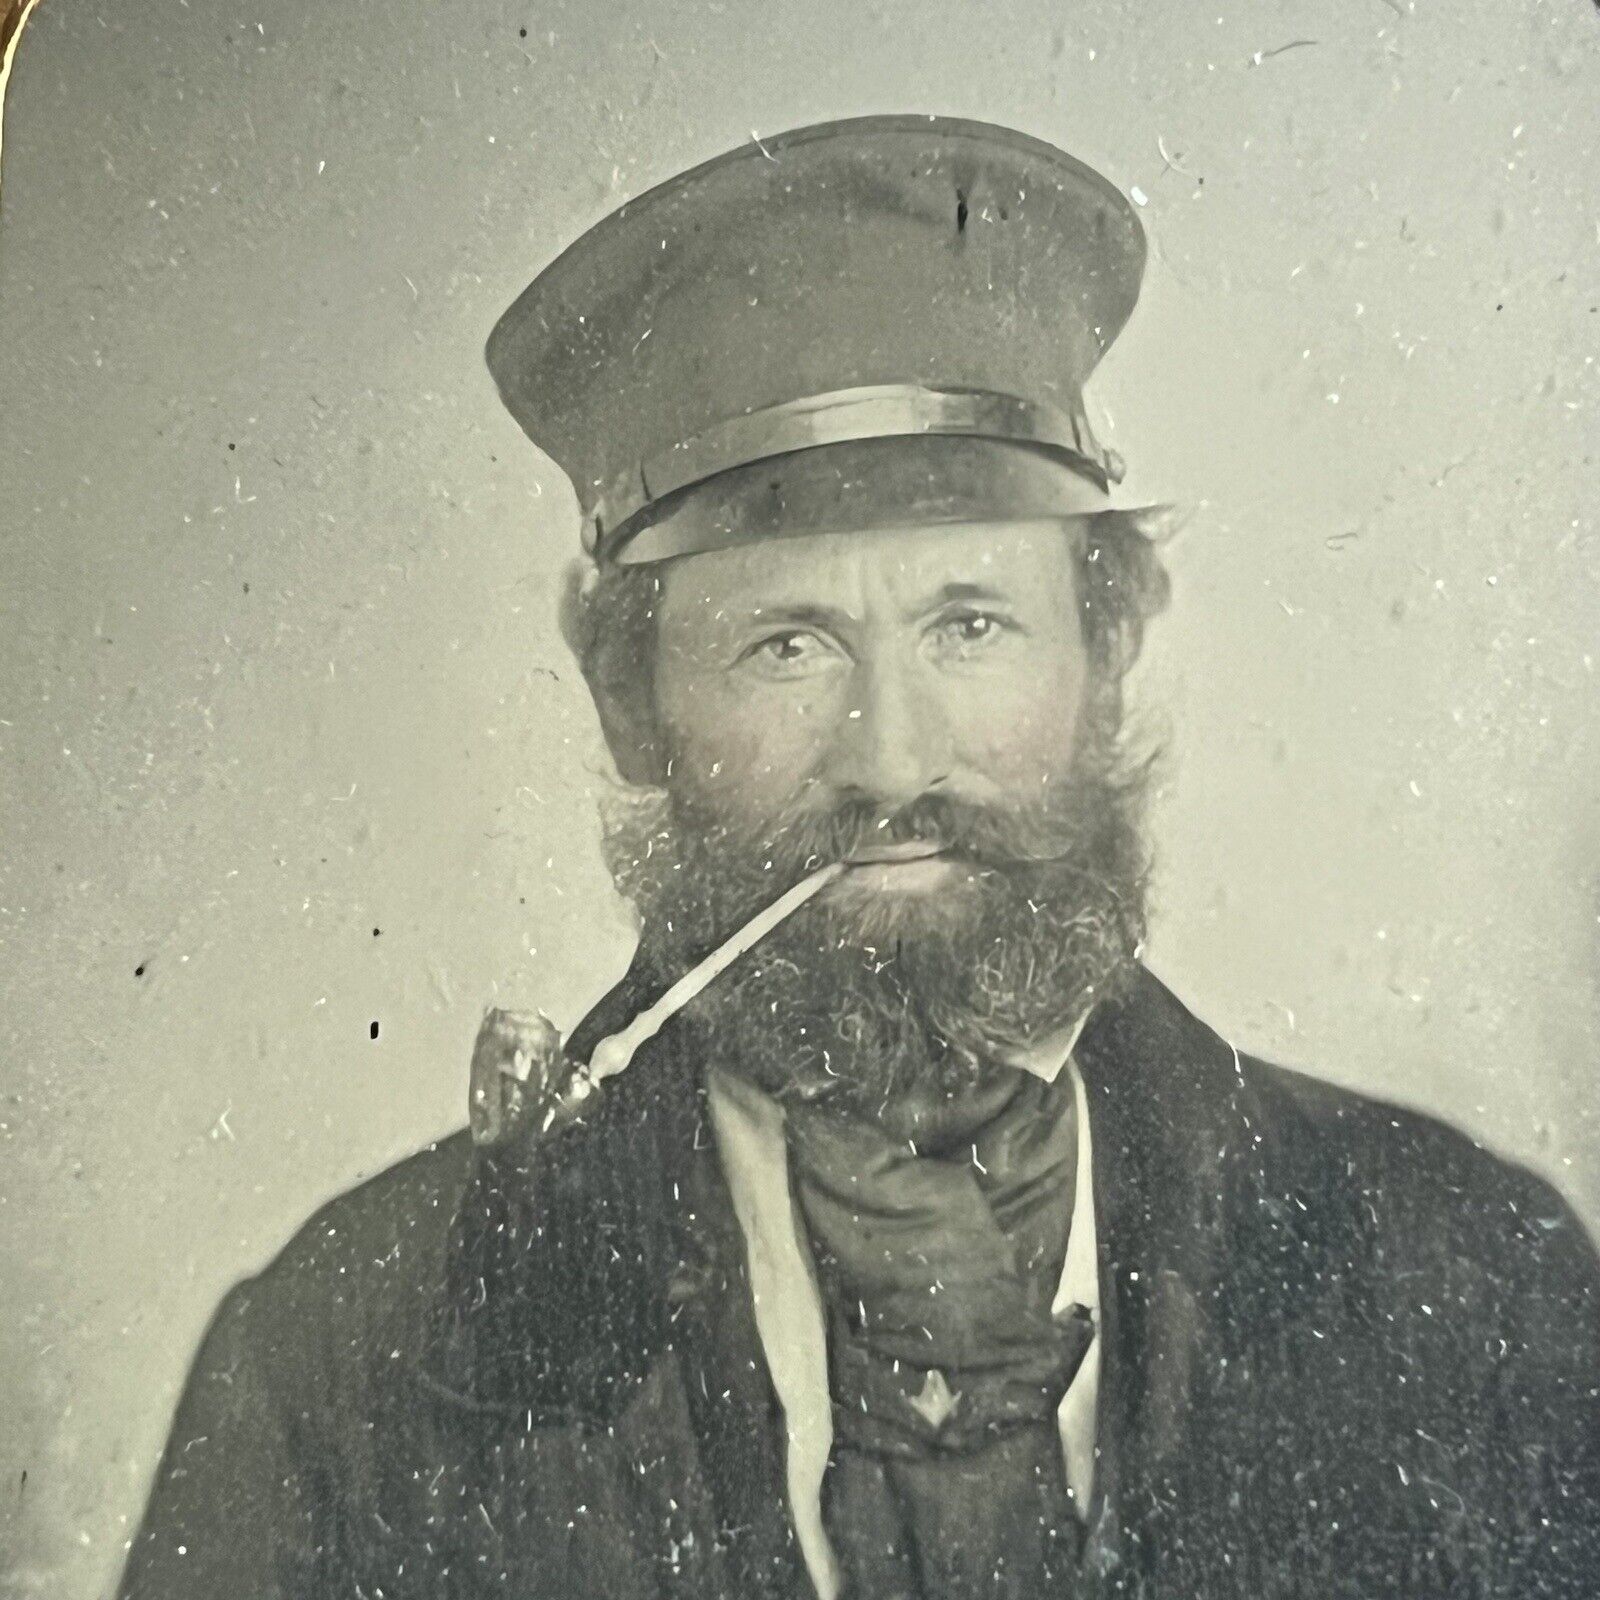 Antique Ambrotype Photograph Charming Man Beard Ship Captain Hat Pipe In Mouth